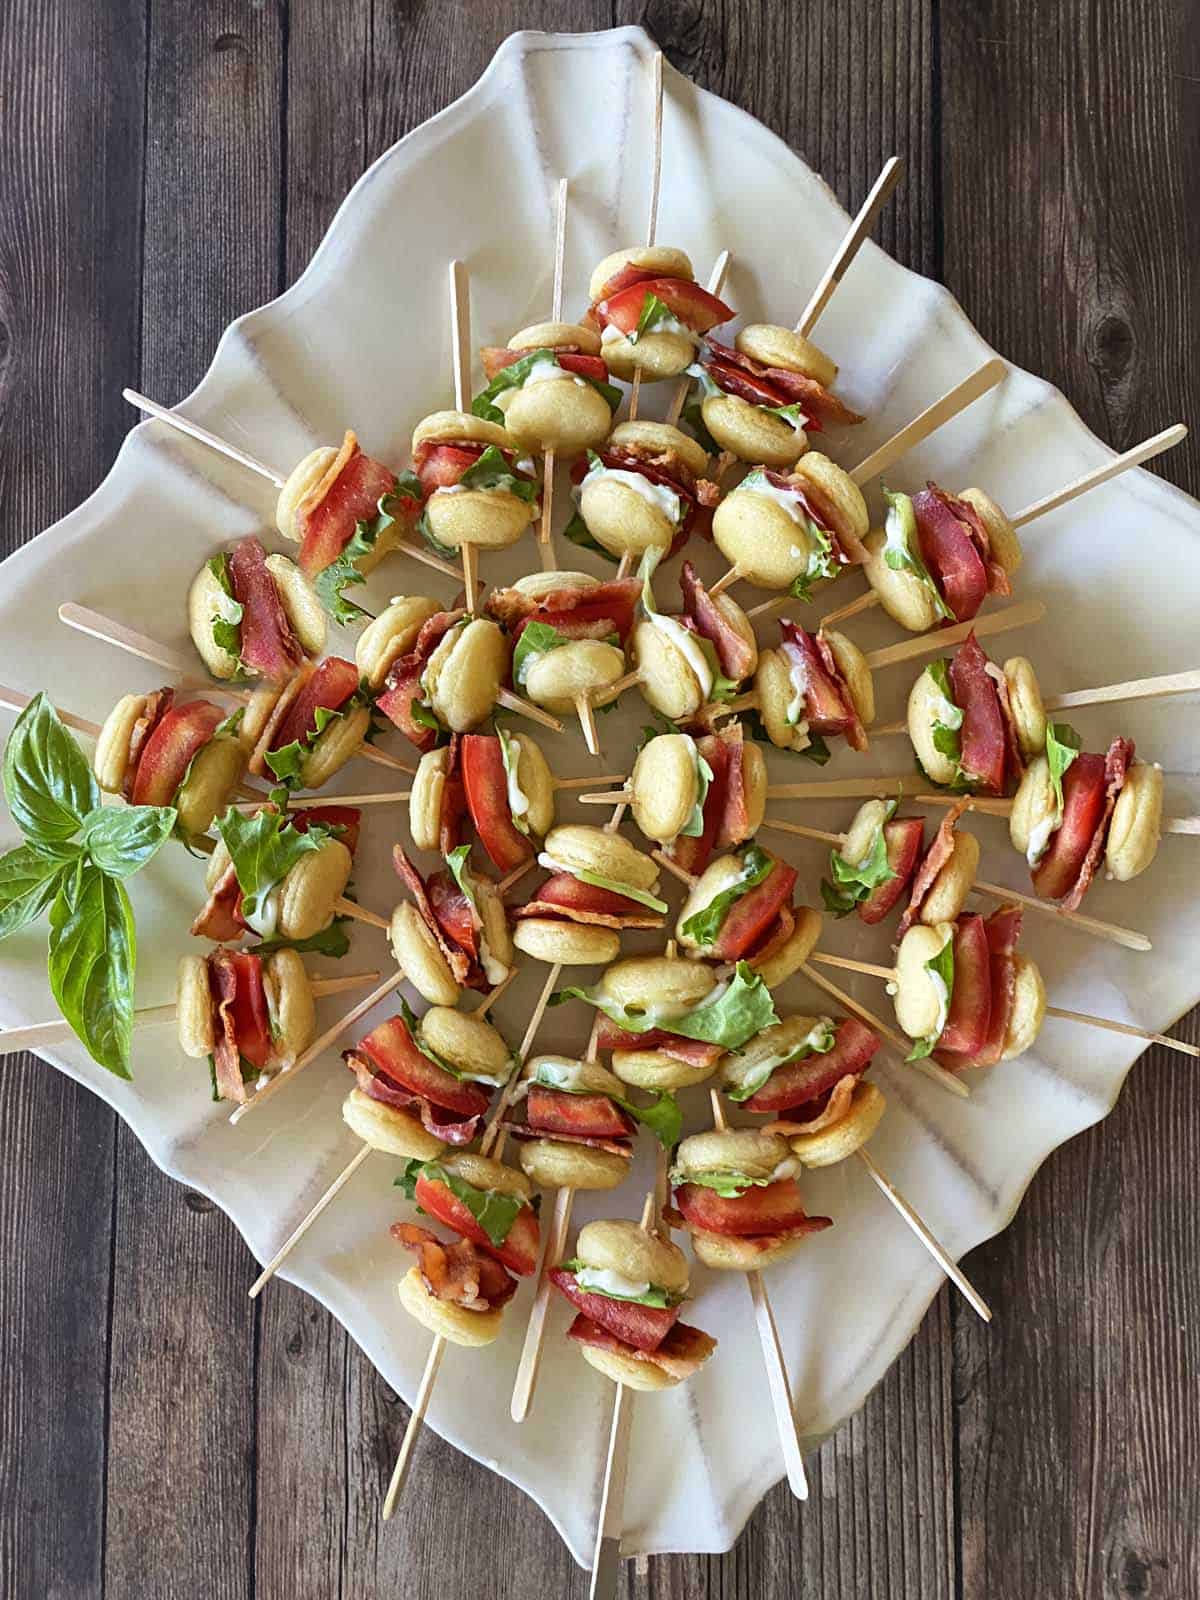 Mini BLT sliders on skewers arranged on a white plate against a wood background